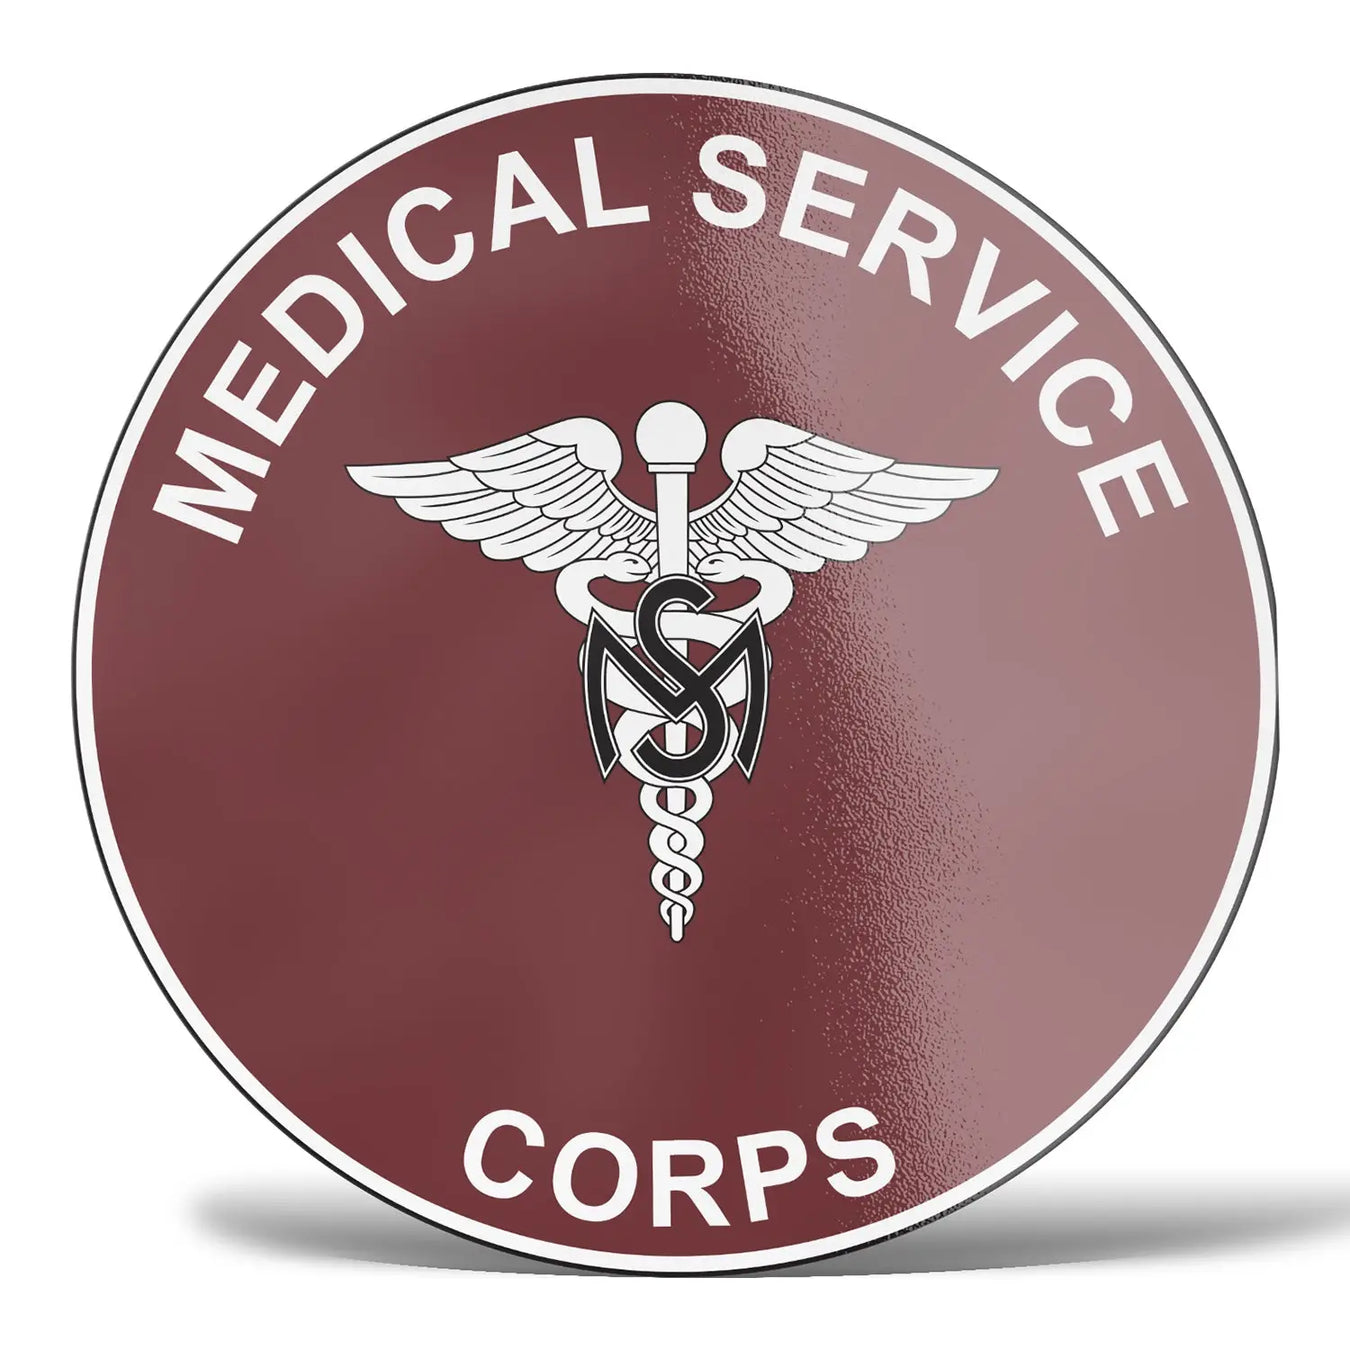 U.S. Army Medical Service Corps Decals